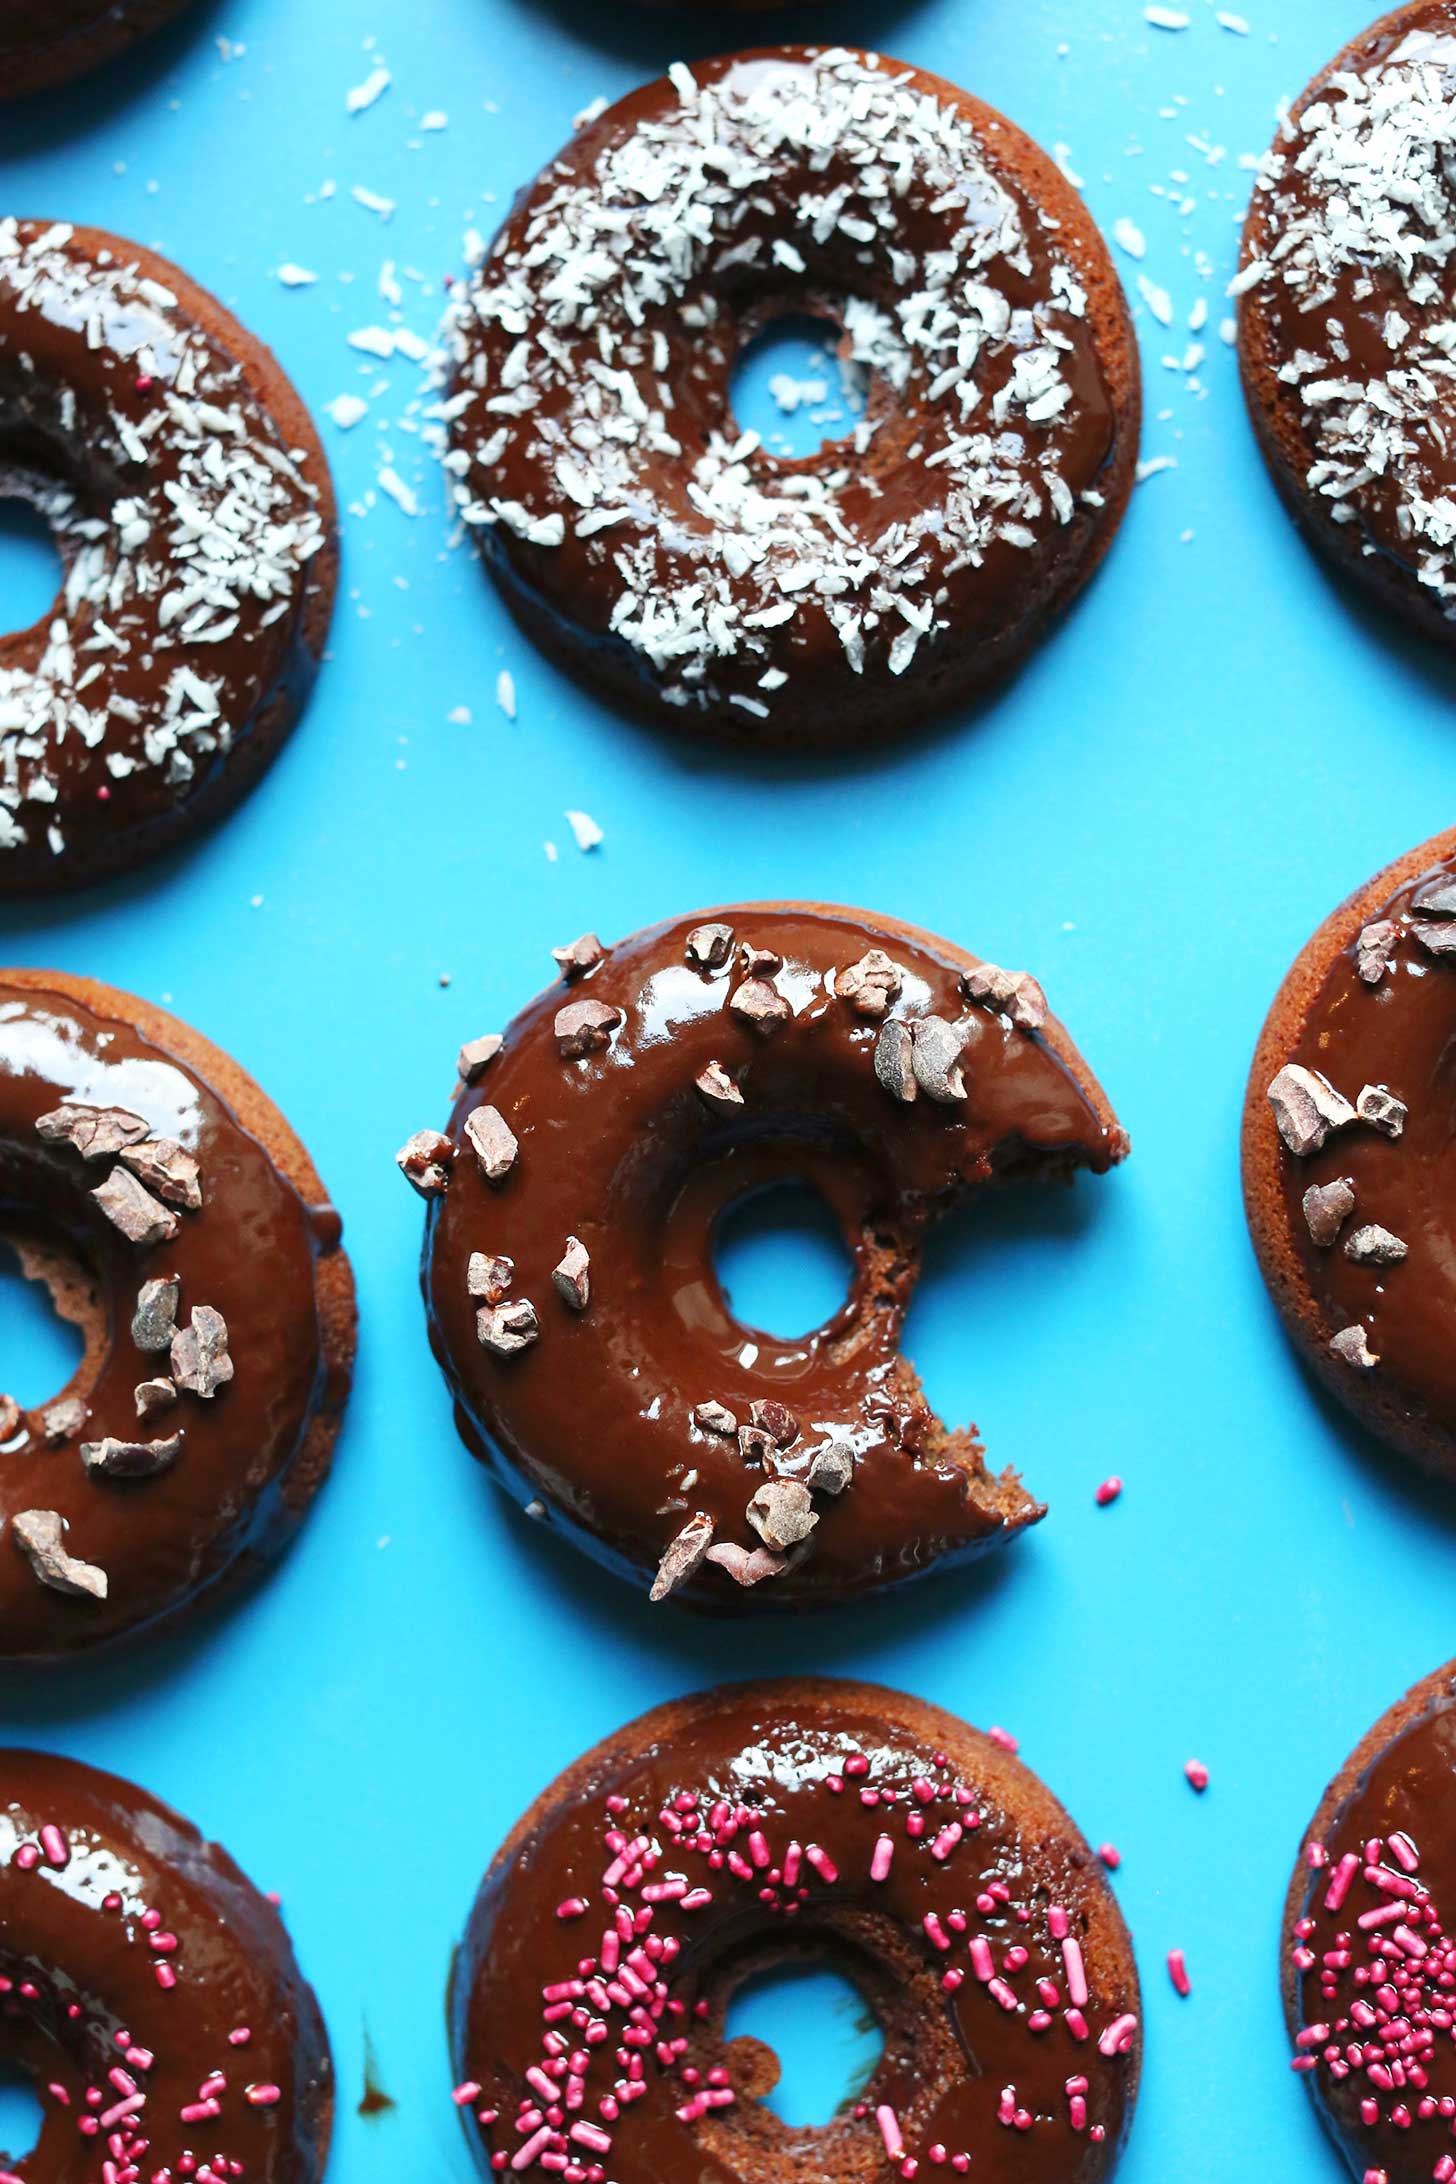 Glazed chocolate donuts topped with sprinkles, cacao nibs, or shredded coconut for a vegan gluten-free dessert